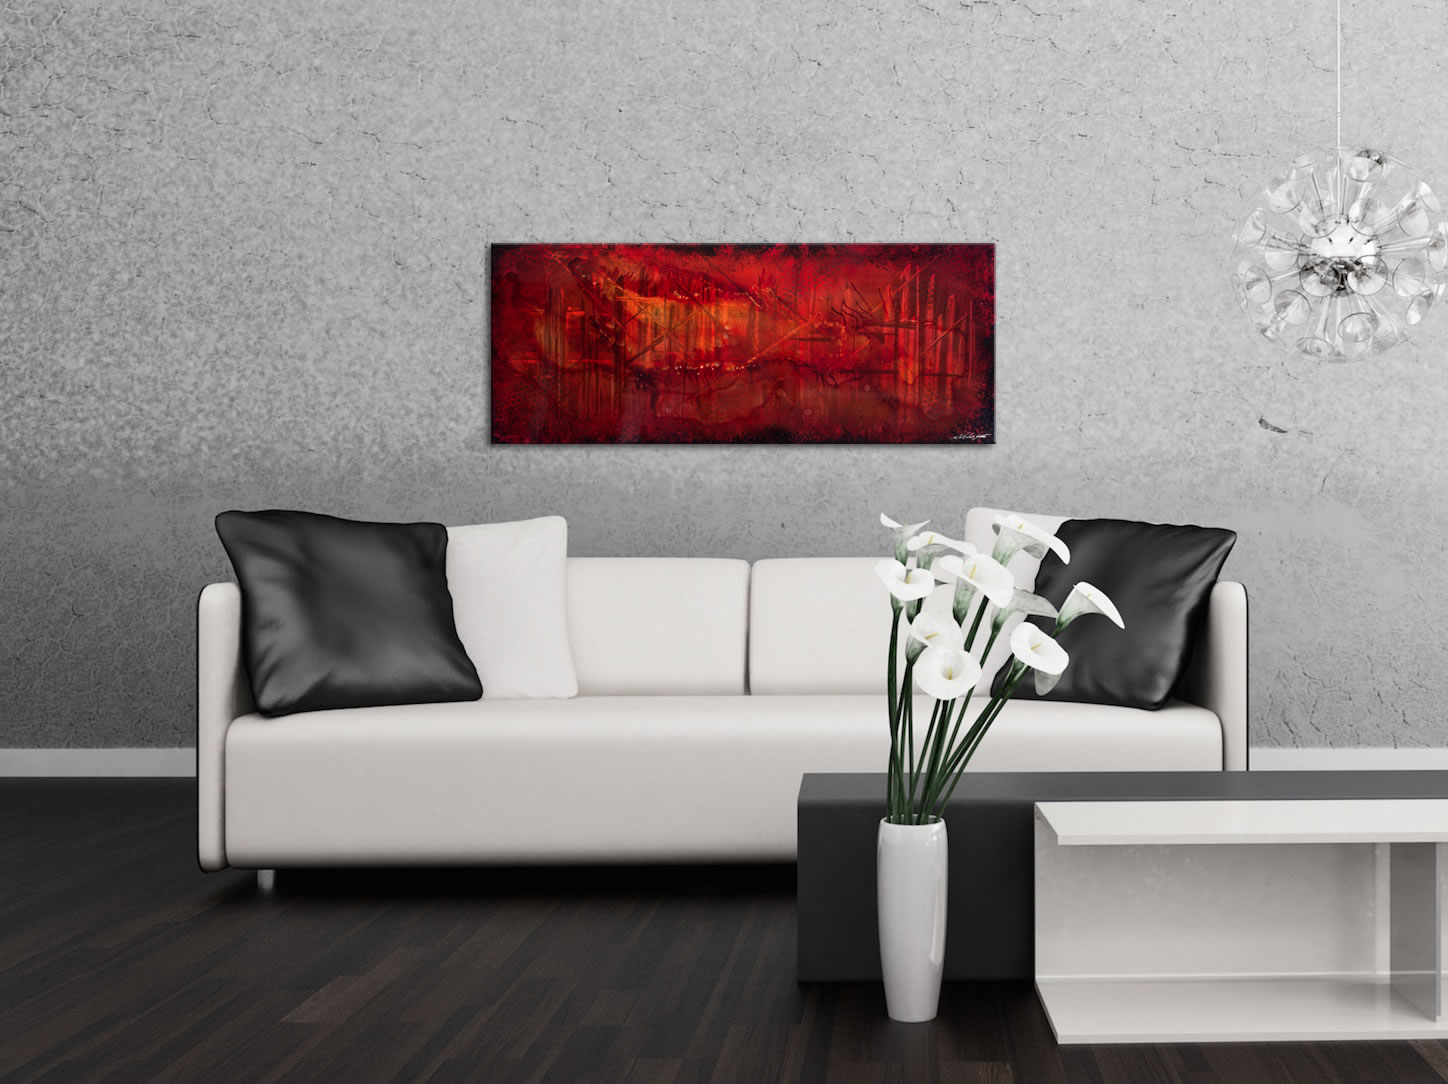 Dreamscape - Contemporary Metal Wall Art - Lifestyle Image